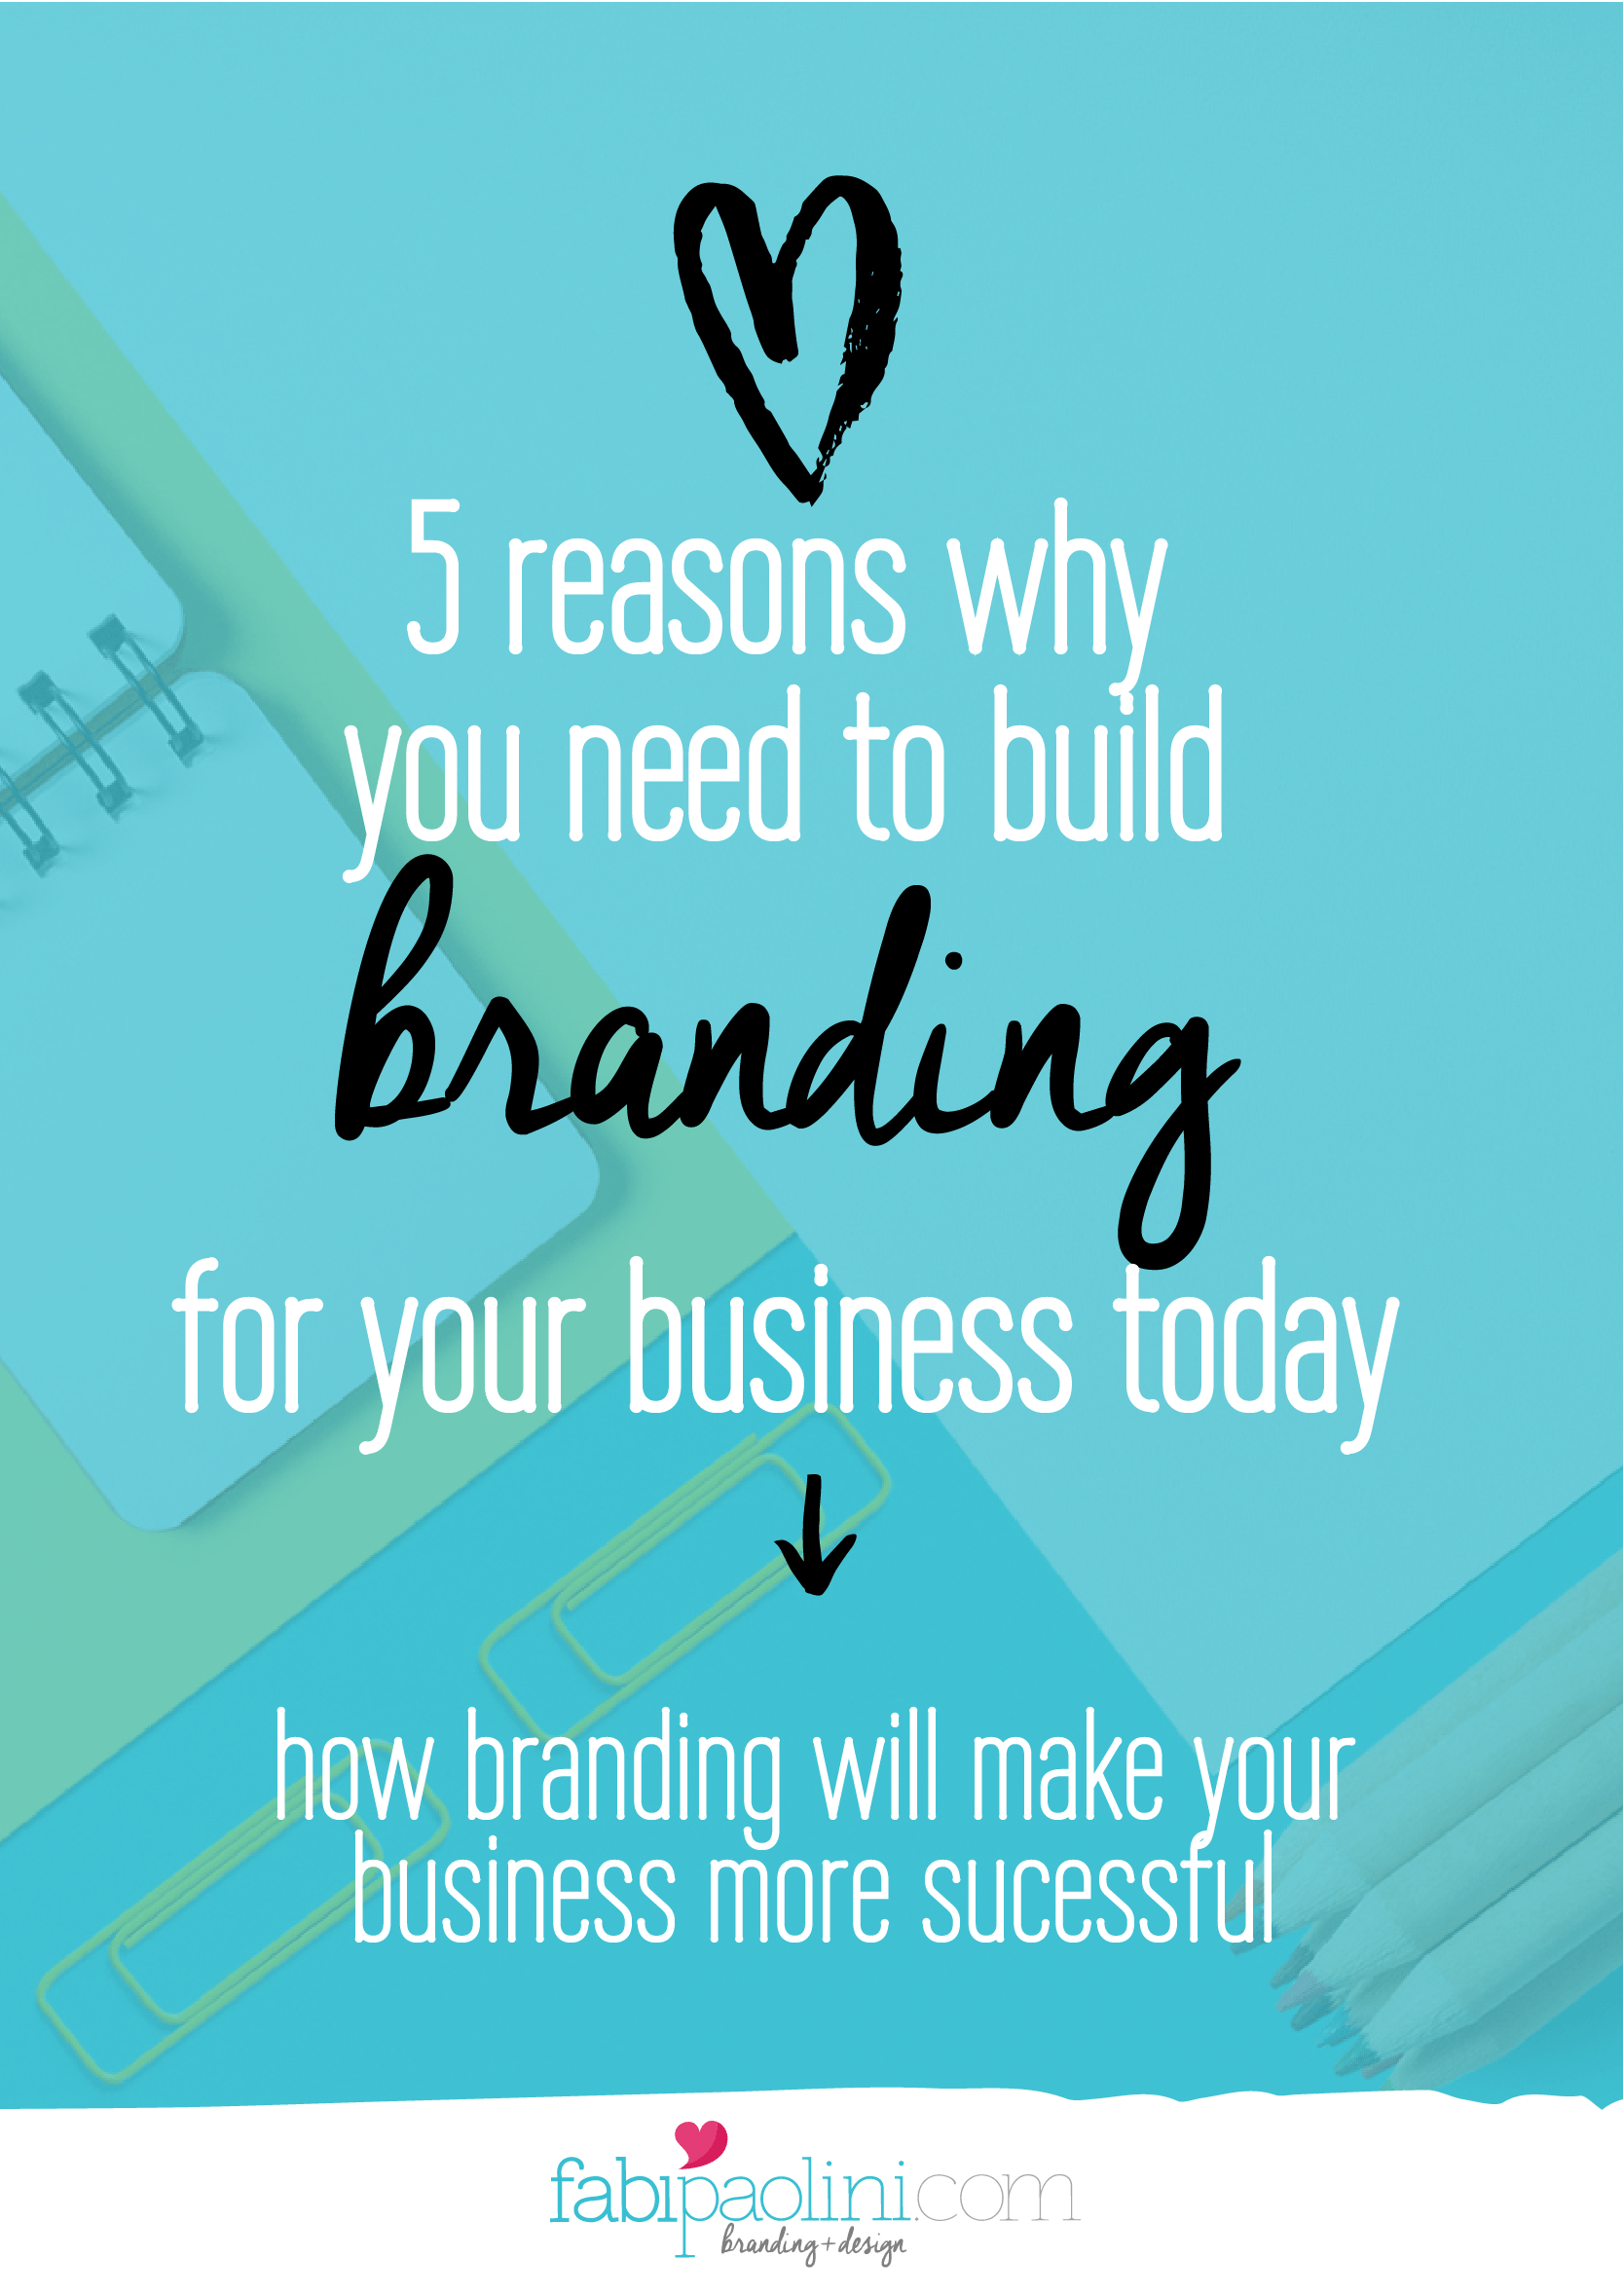 5 reasons you need to build branding for your business today. How branding will make your business more successful. Click to read more!